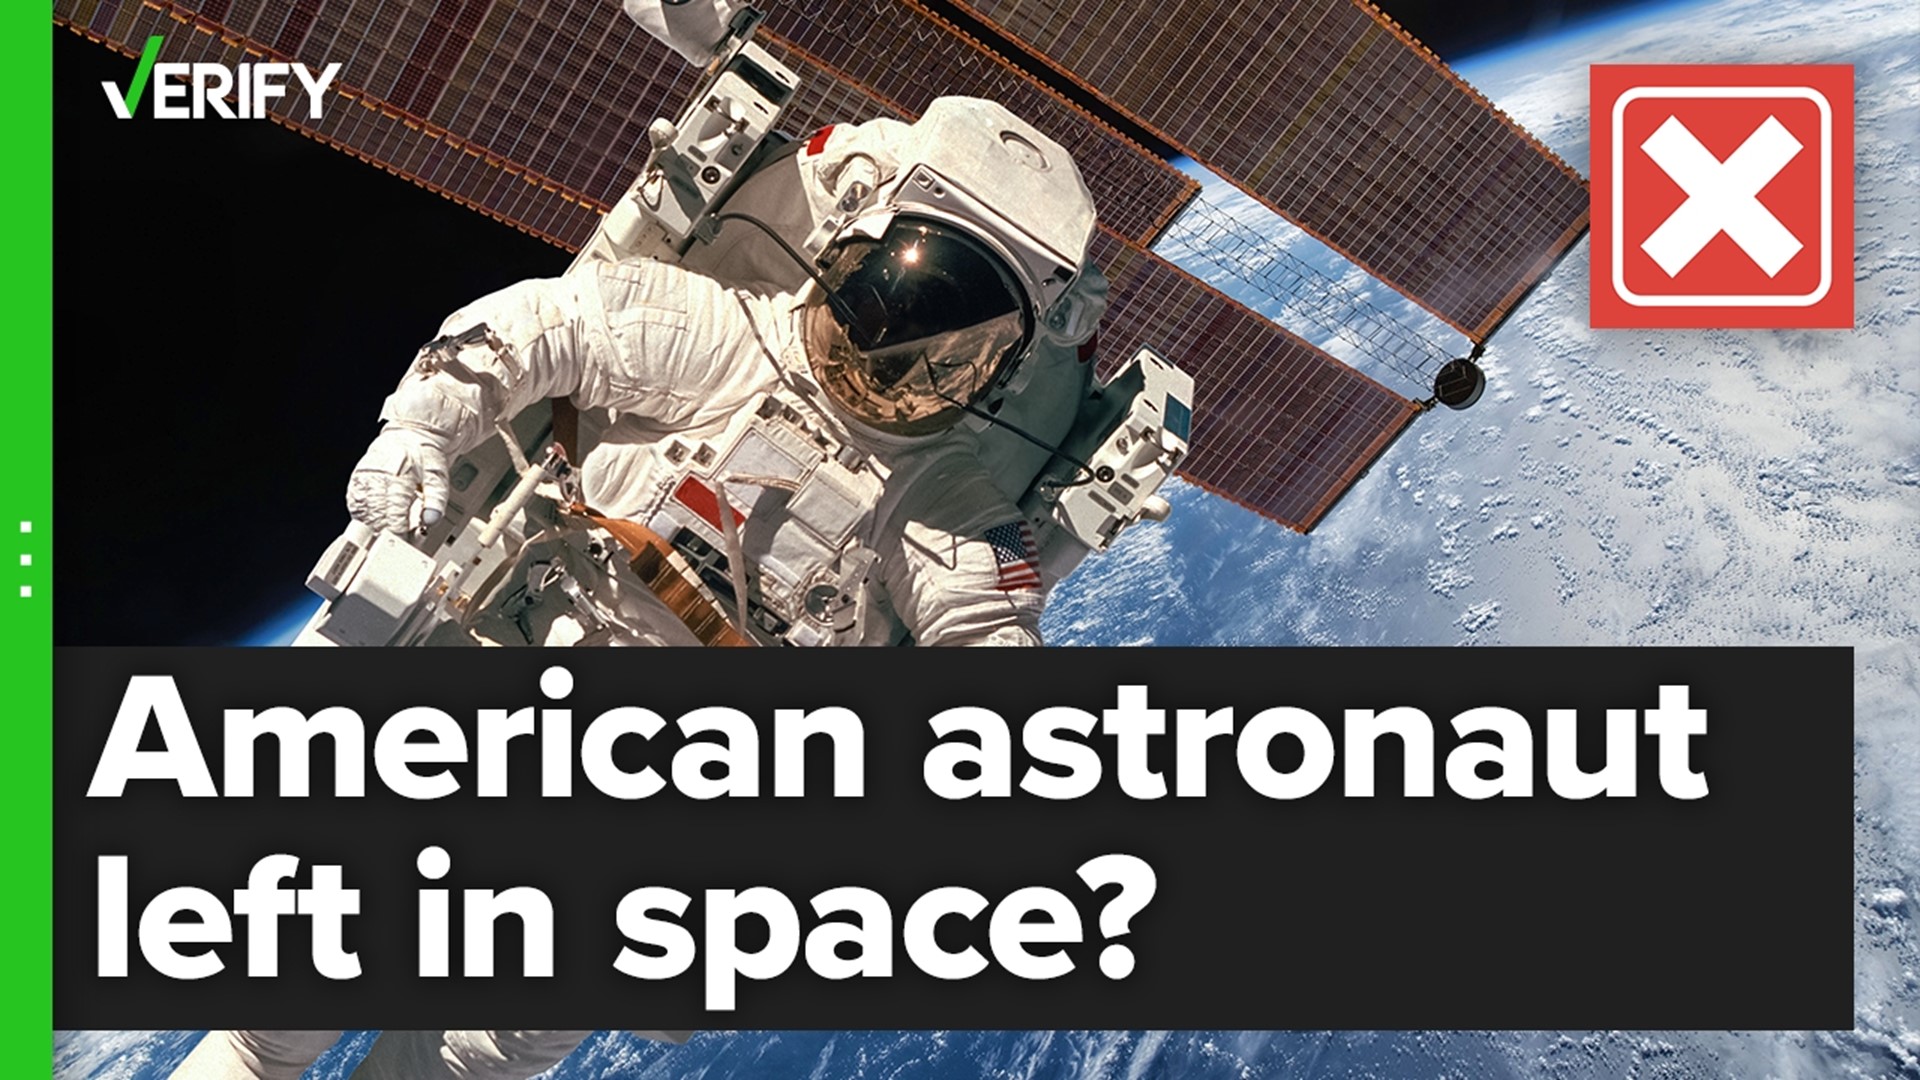 Did Russia leave an American astronaut behind in space? The VERIFY team confirms this is false.